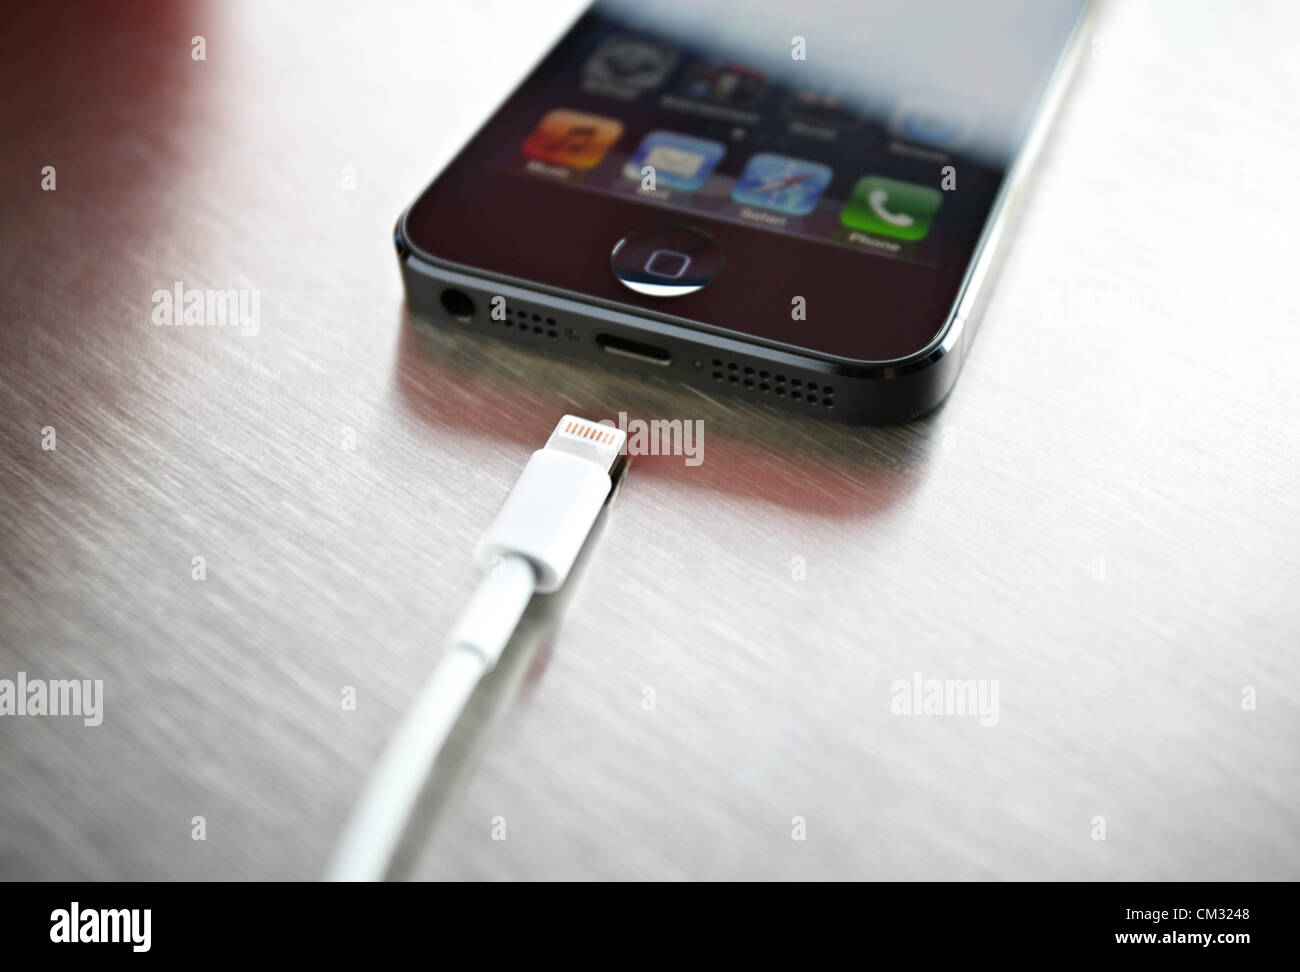 Inside a coffee shop, a newly released, black, Apple iPhone 5 sits face up on a metal countertop next to Apple's Lightning Connection cable. The iPhone 5 became available to public on Friday, September 21, 2012. Stock Photo